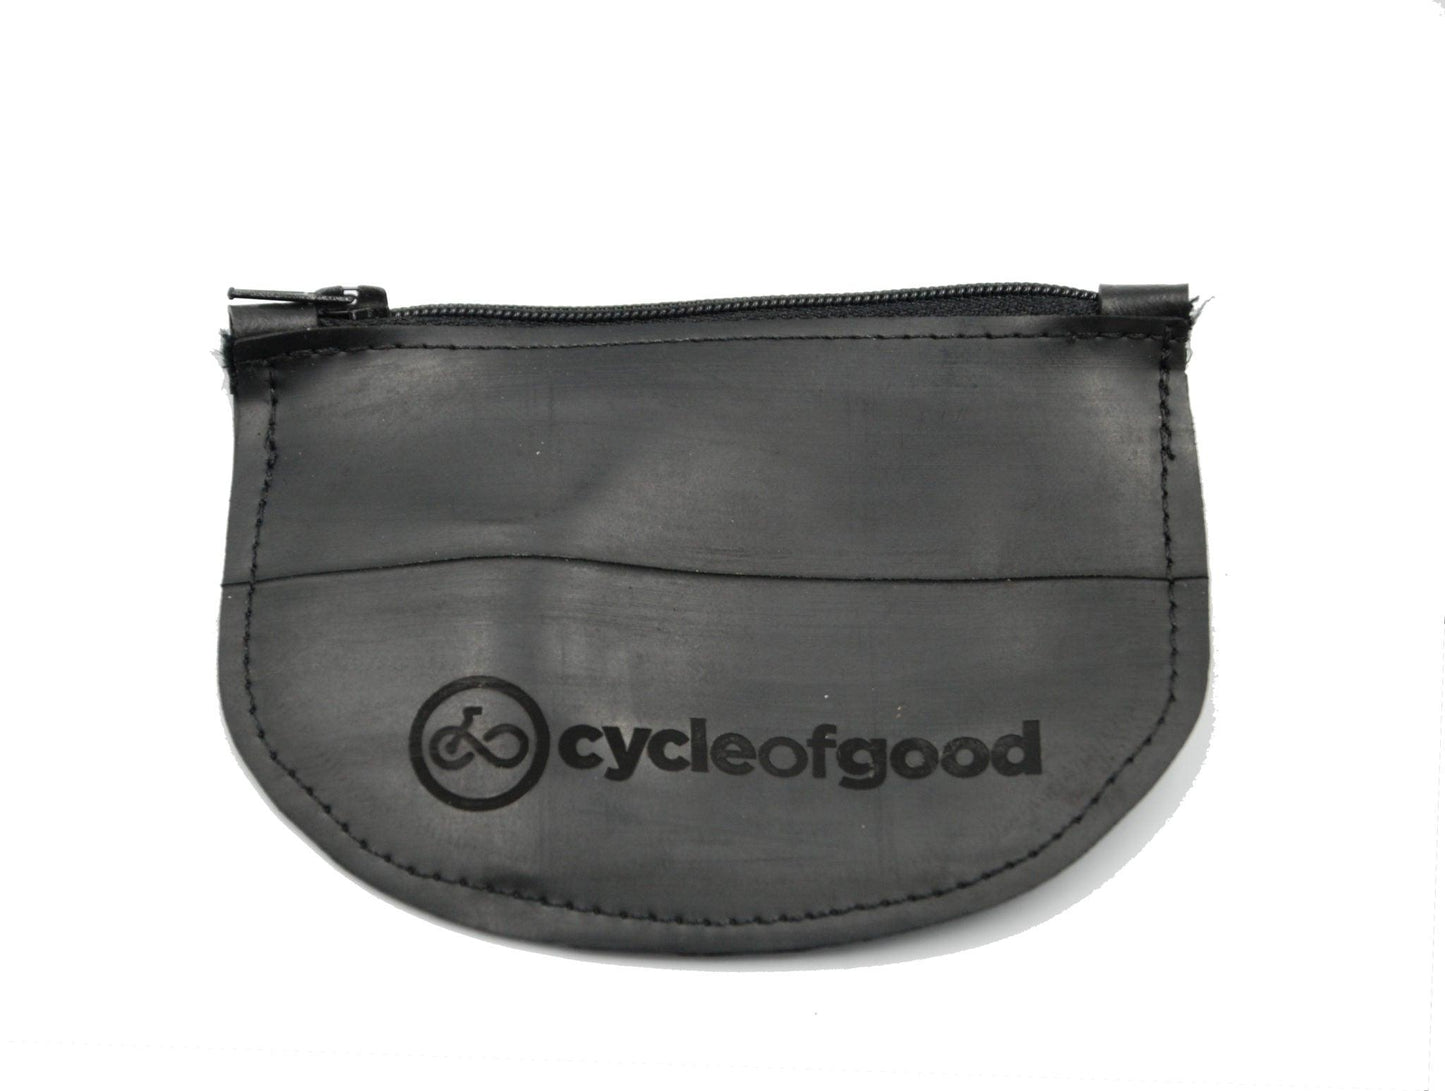 Cycle Of Good Coin Purse - Recycled Inner Tube - Bike Boom